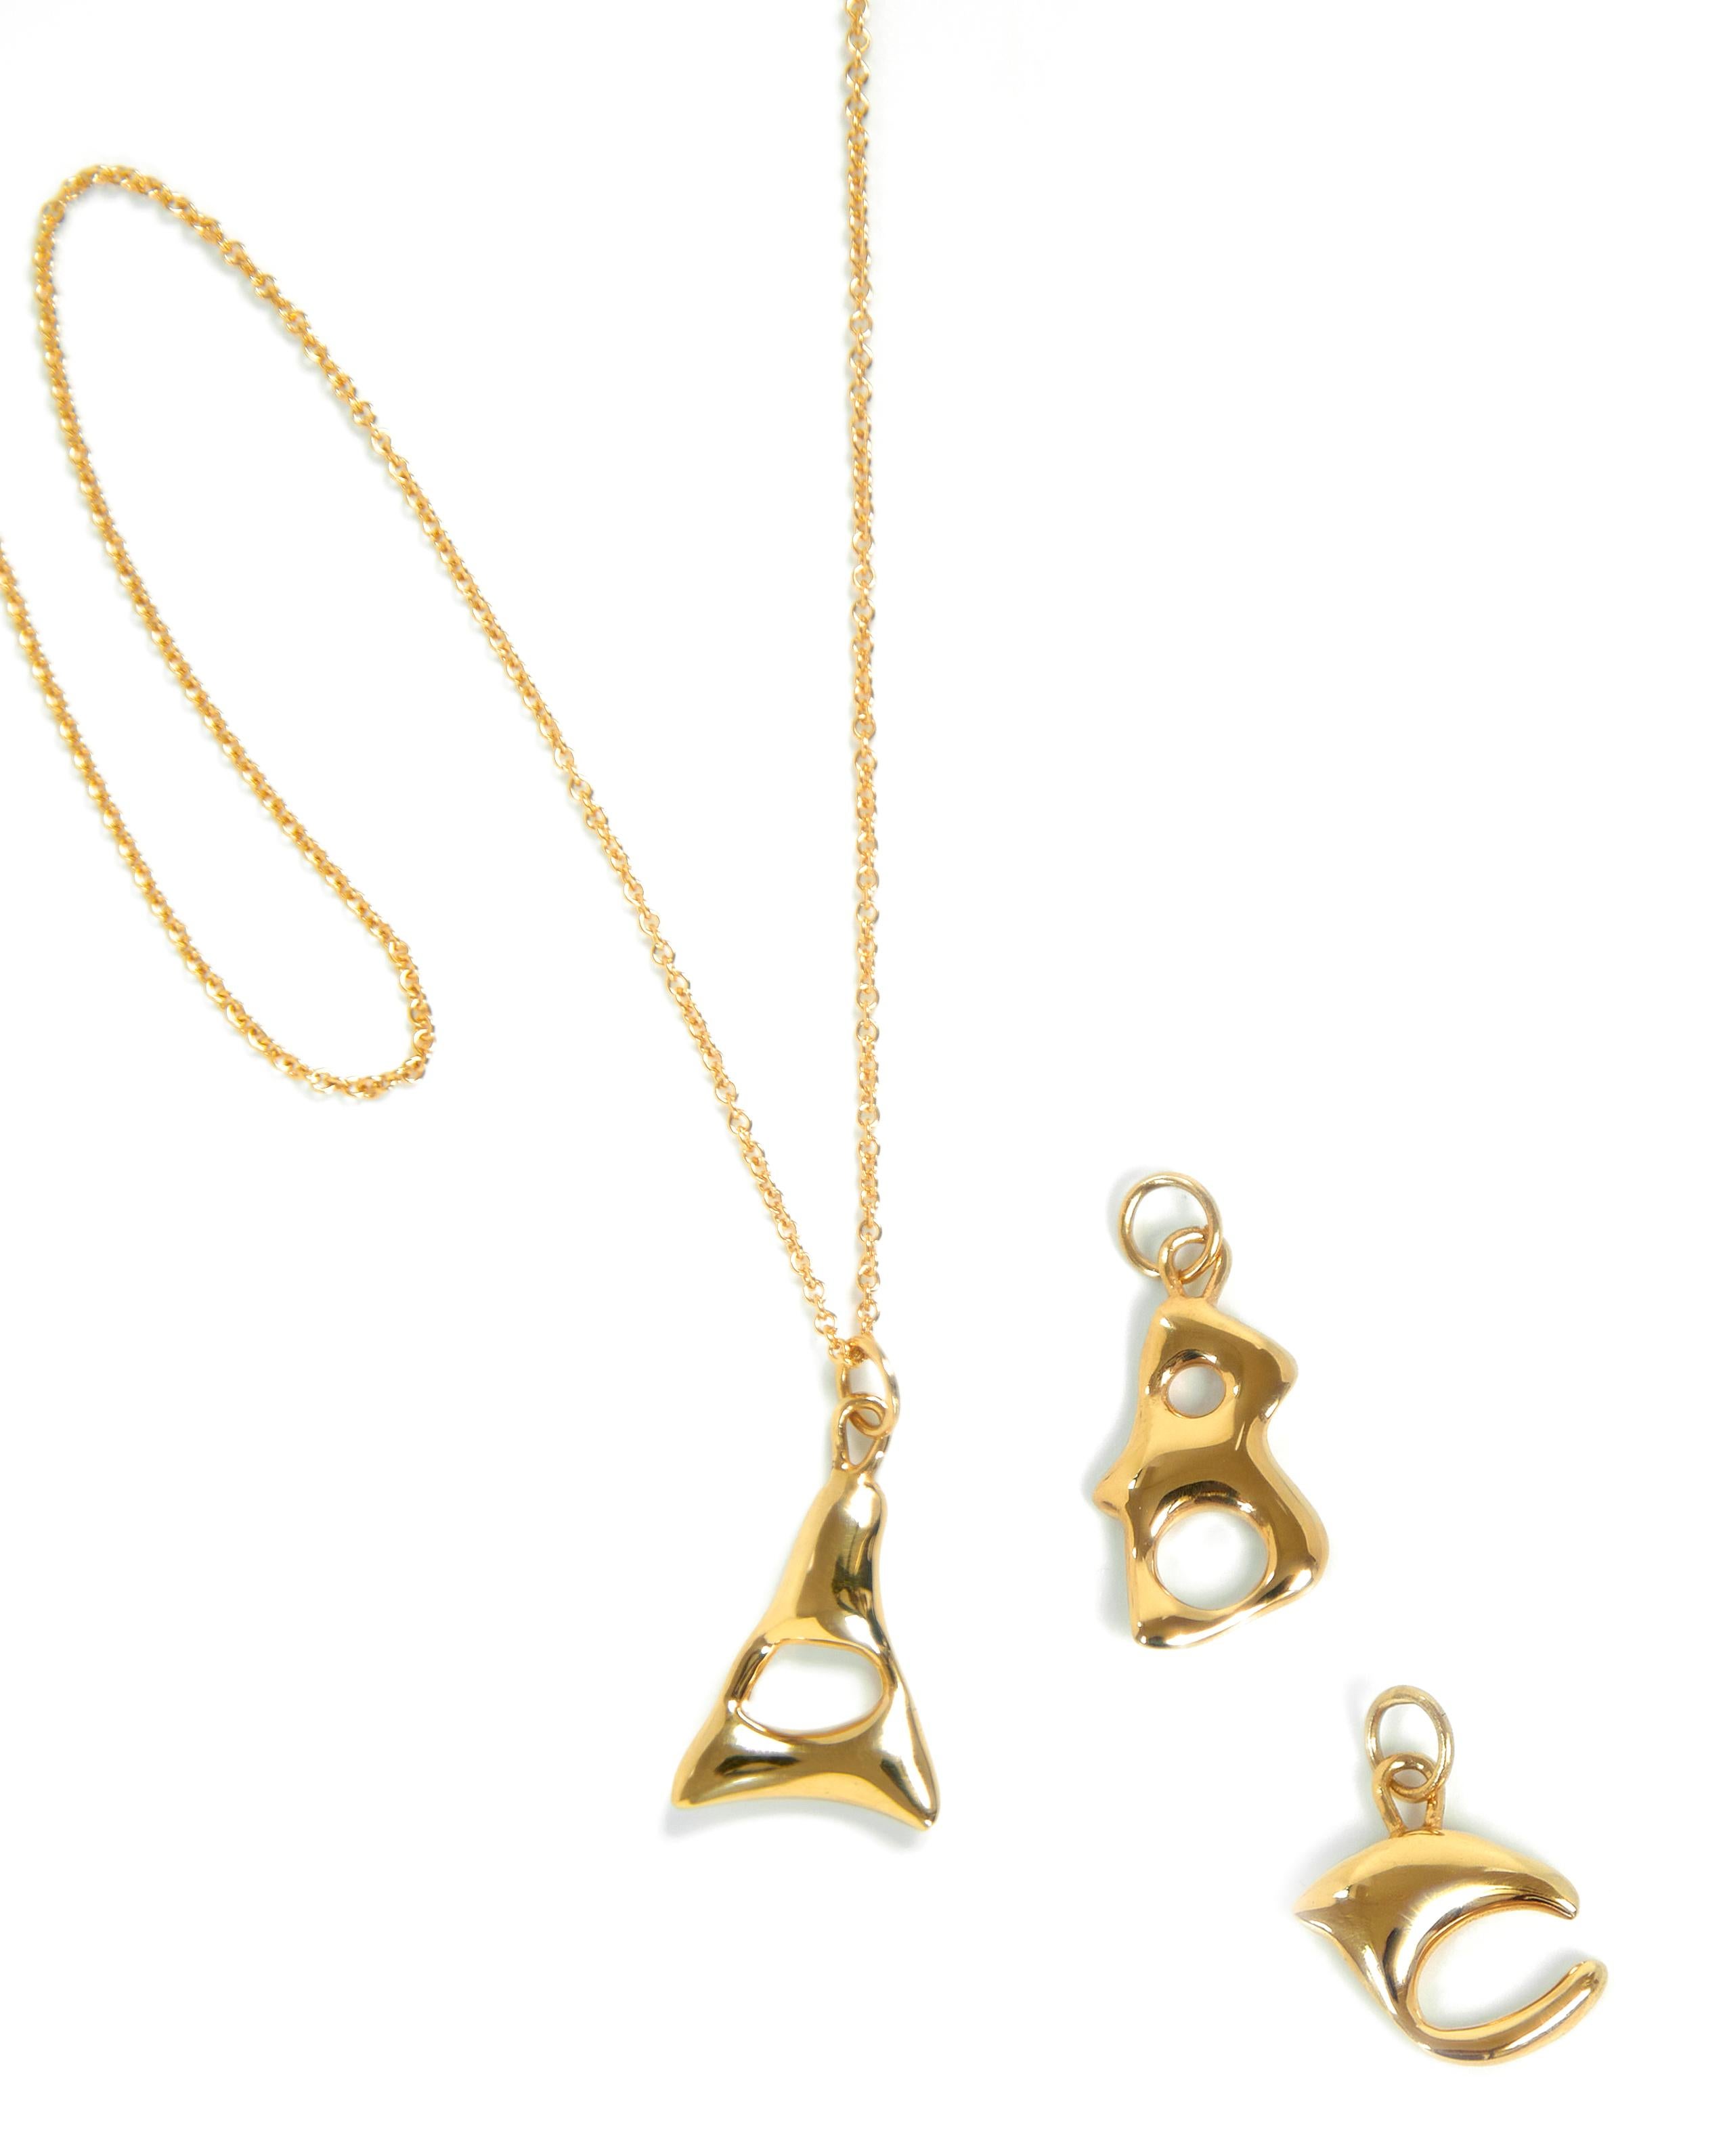 BAR Jewellery, London UK, ALPHABET NECKLACE, Gold Plated 

Our Alphabet necklaces were designed by hand 'writing' each individual letter using molten wax that is then cast in solid silver. Inspiration for the fluid, tactile letter shapes comes from